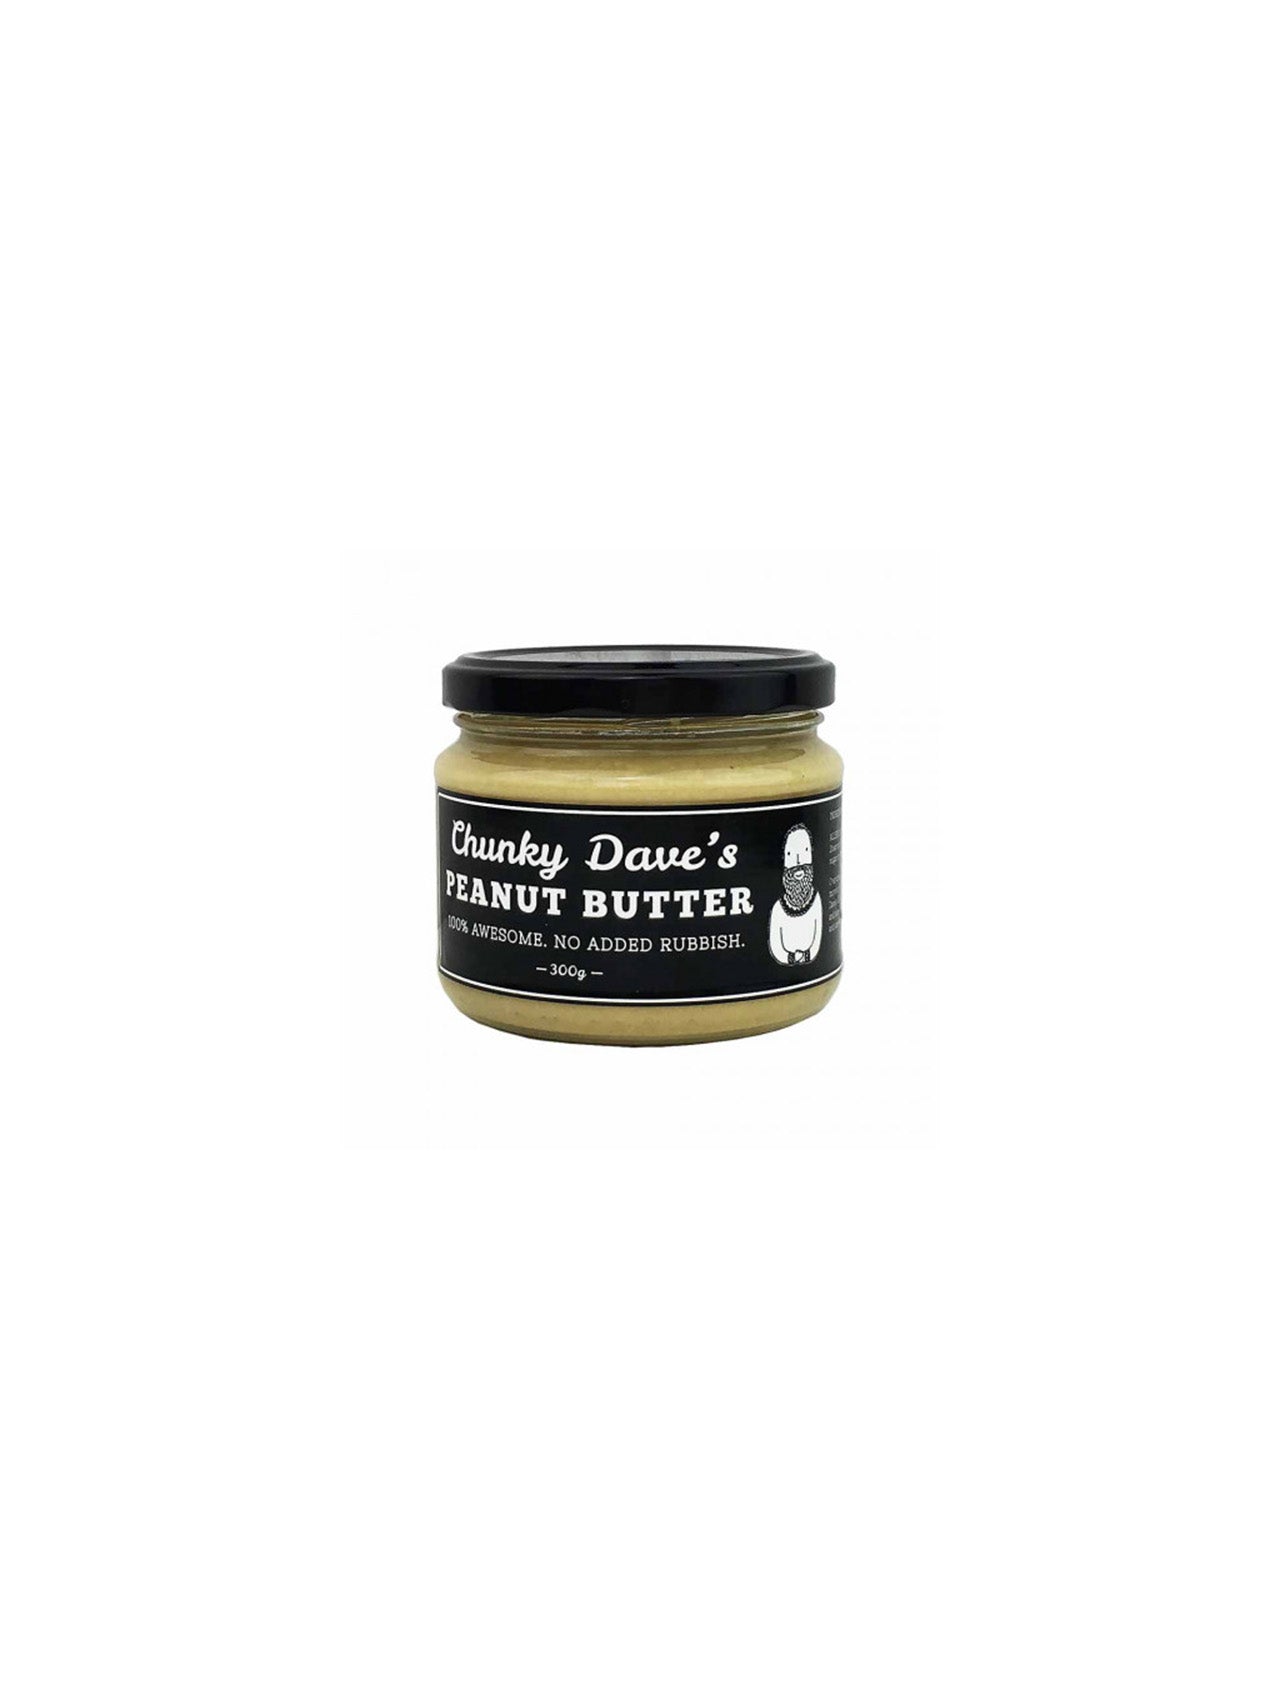 Chunky Dave's Chilli Peanut Butter